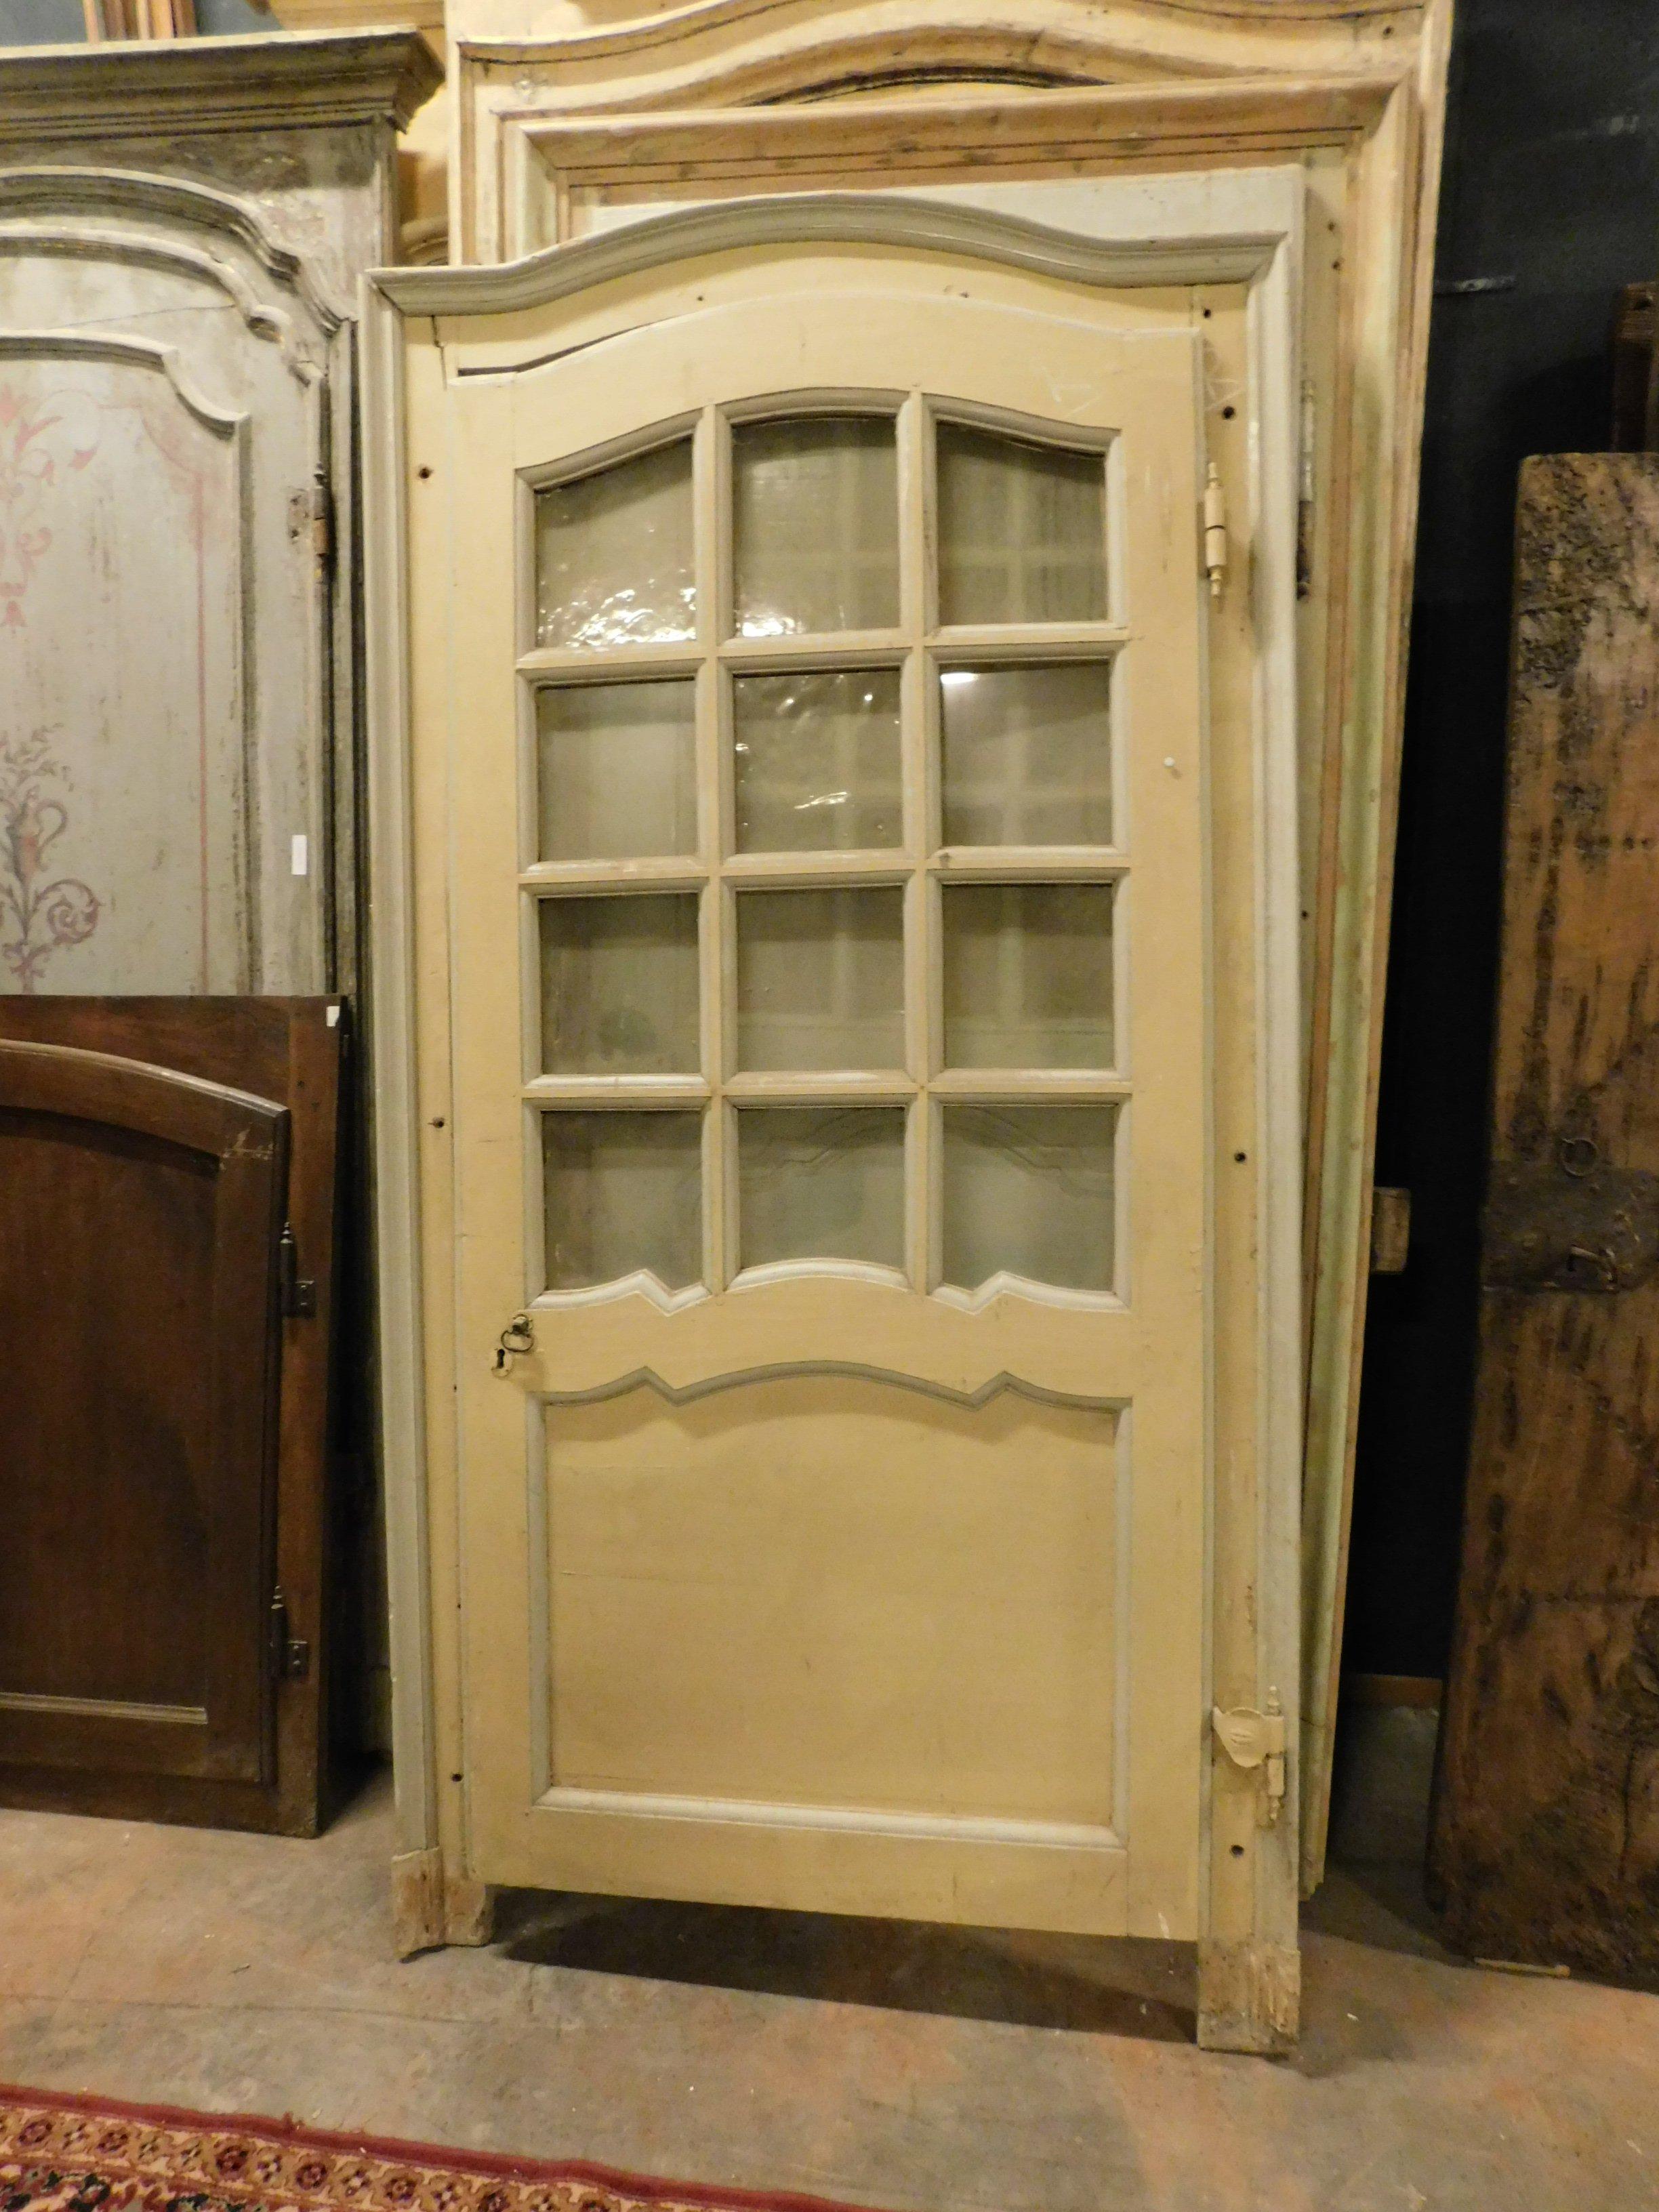 Antique wooden glass door, with panel and wavy frame typical of the time, pale yellow or light gray lacquer, with original gooseneck (crooked opening), original irons and handle, still with its glass, built entirely by hand in the late 1700s by